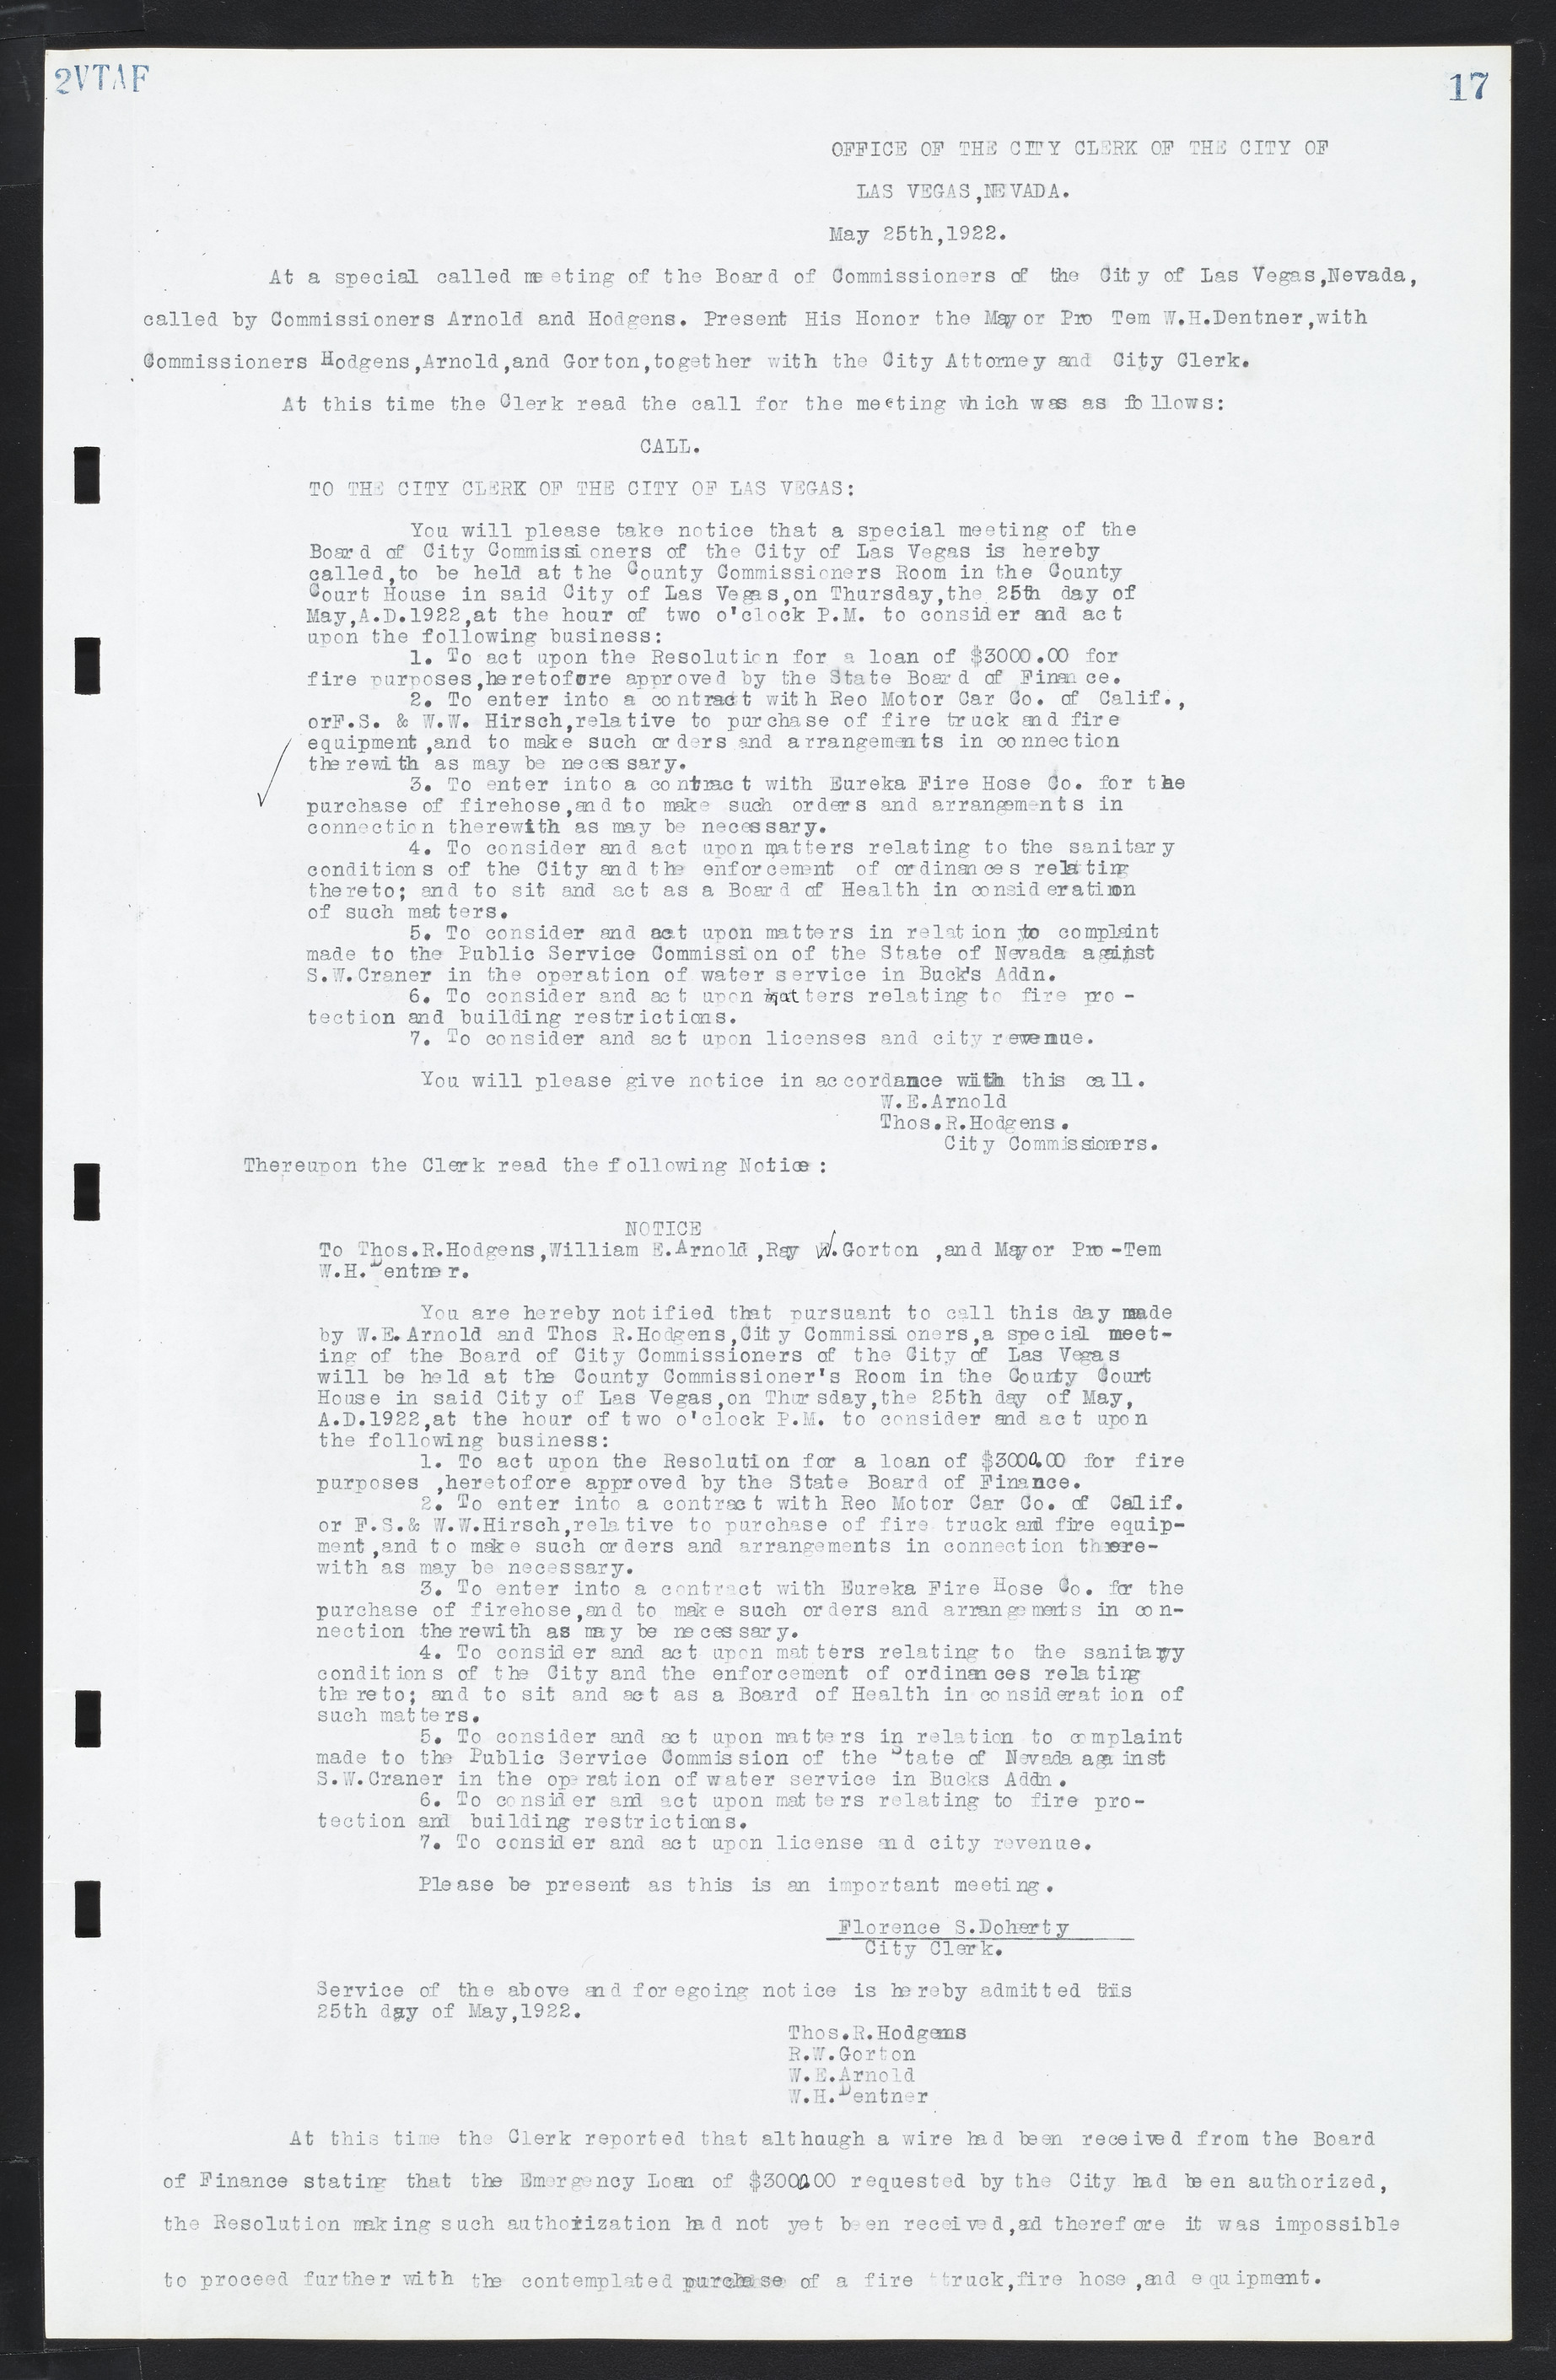 Las Vegas City Commission Minutes, March 1, 1922 to May 10, 1929, lvc000002-24